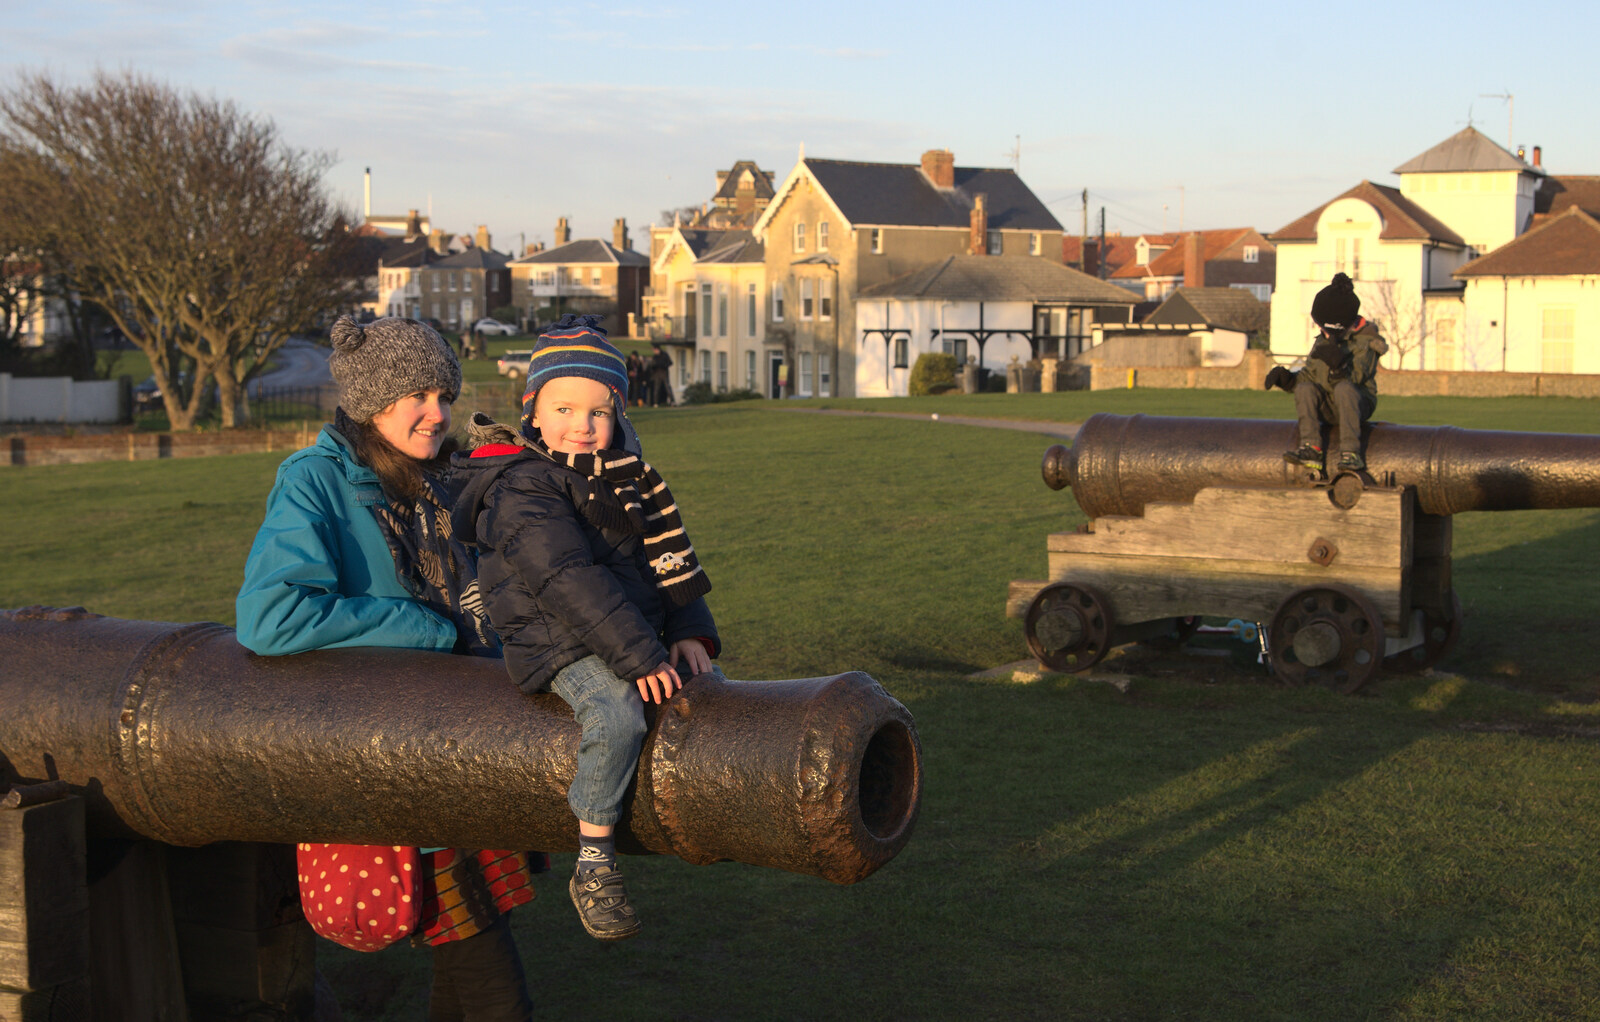 Harry sits on the barrel of a cannon from Sunset on the Beach, Southwold, Suffolk - 30th December 2014